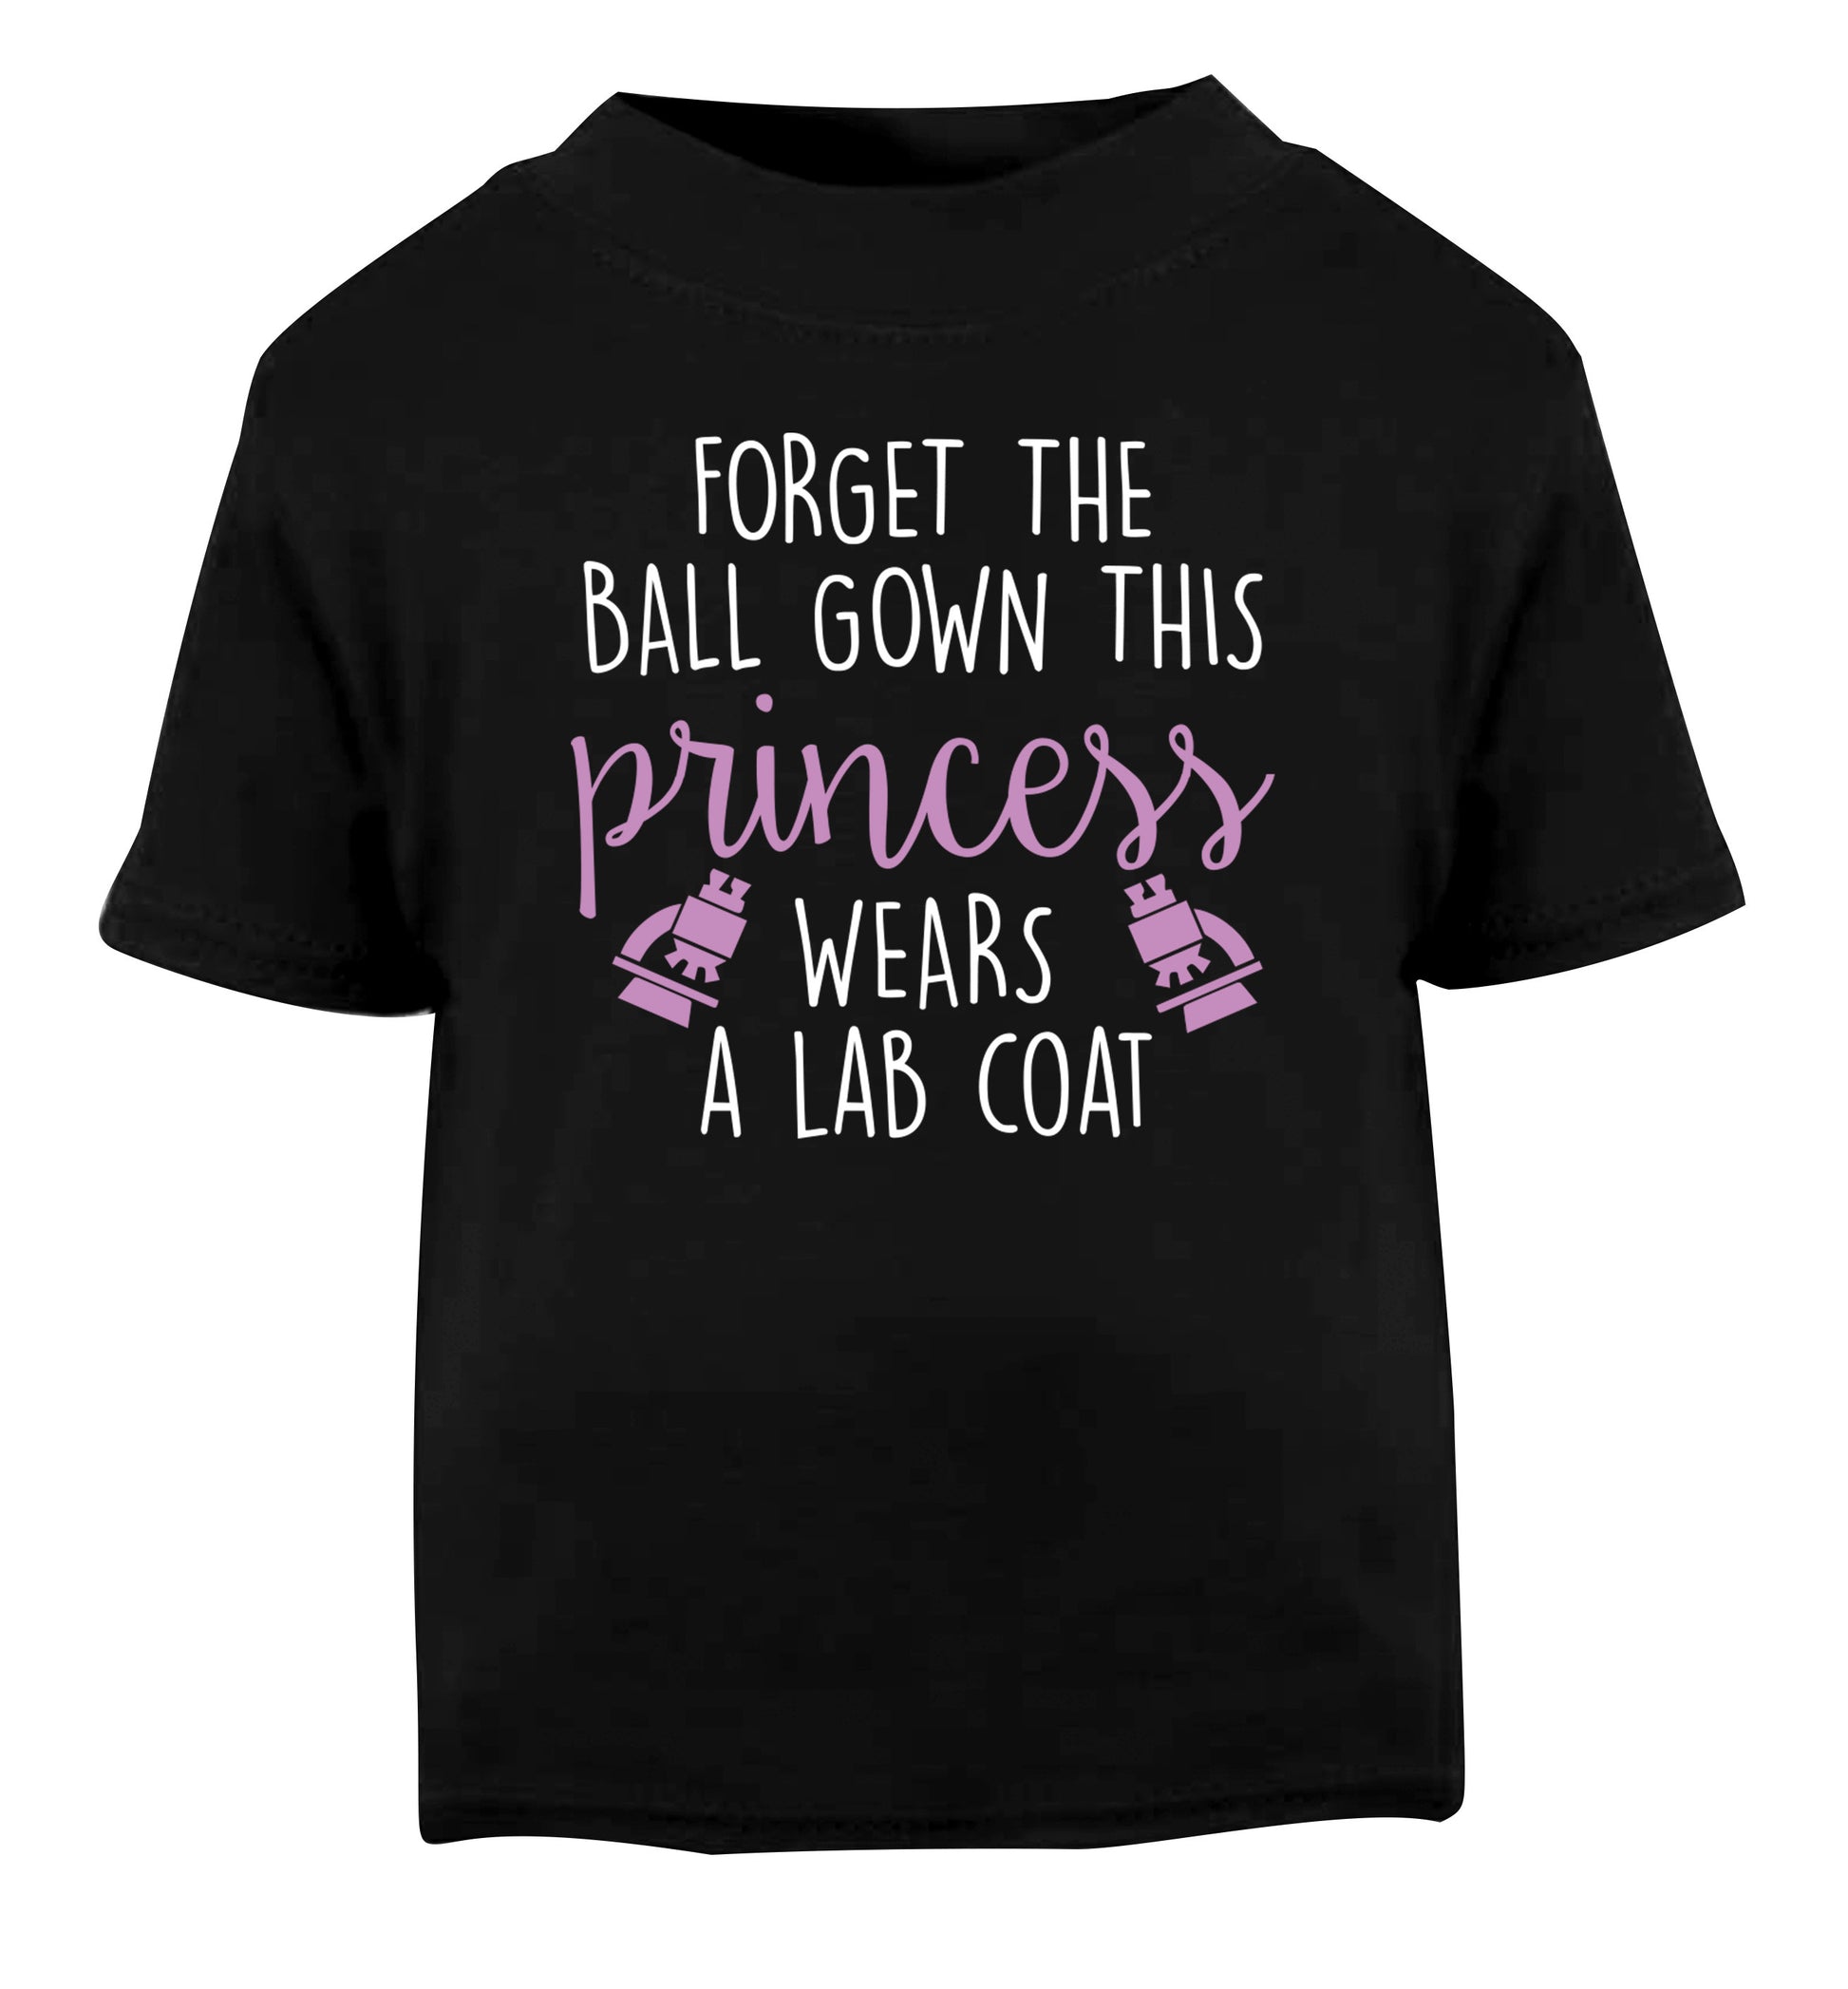 Forget the ball gown this princess wears a lab coat Black Baby Toddler Tshirt 2 years